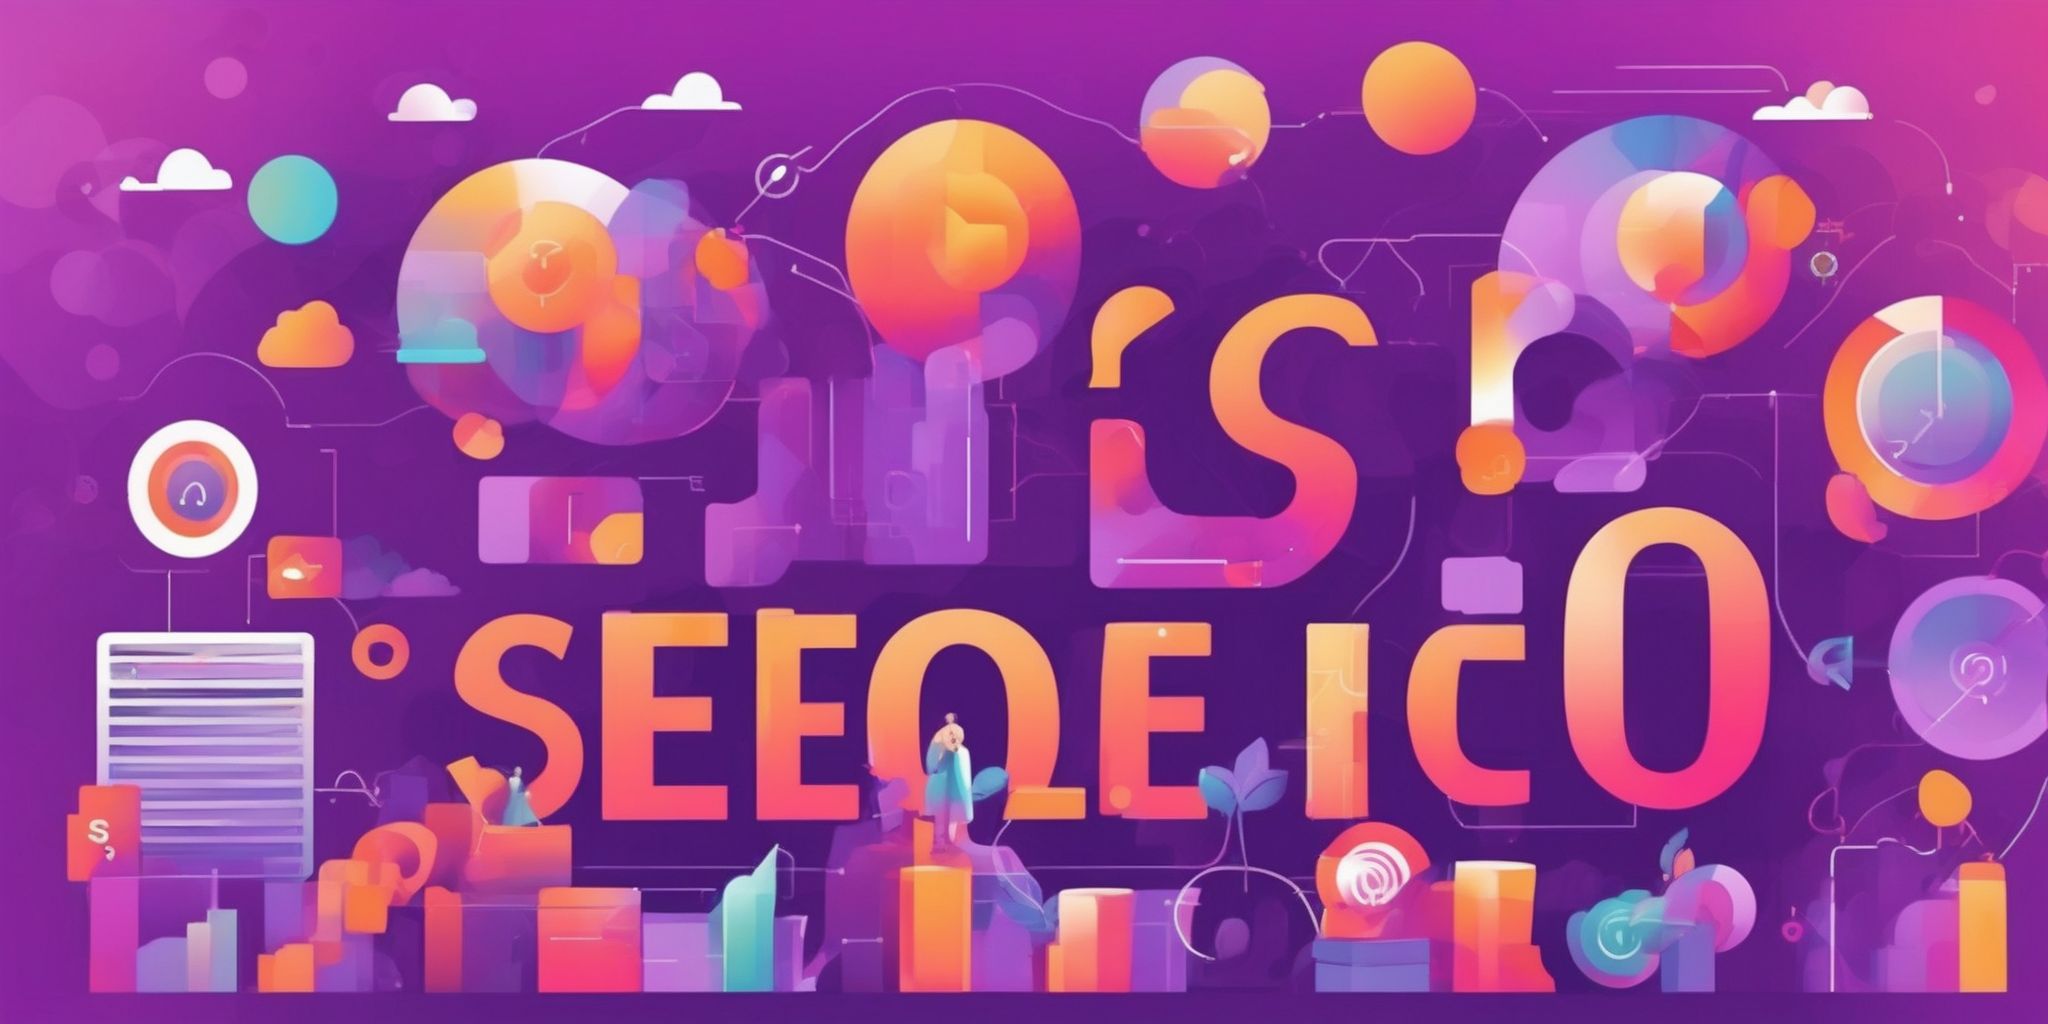 SEO in flat illustration style, colorful purple gradient colors